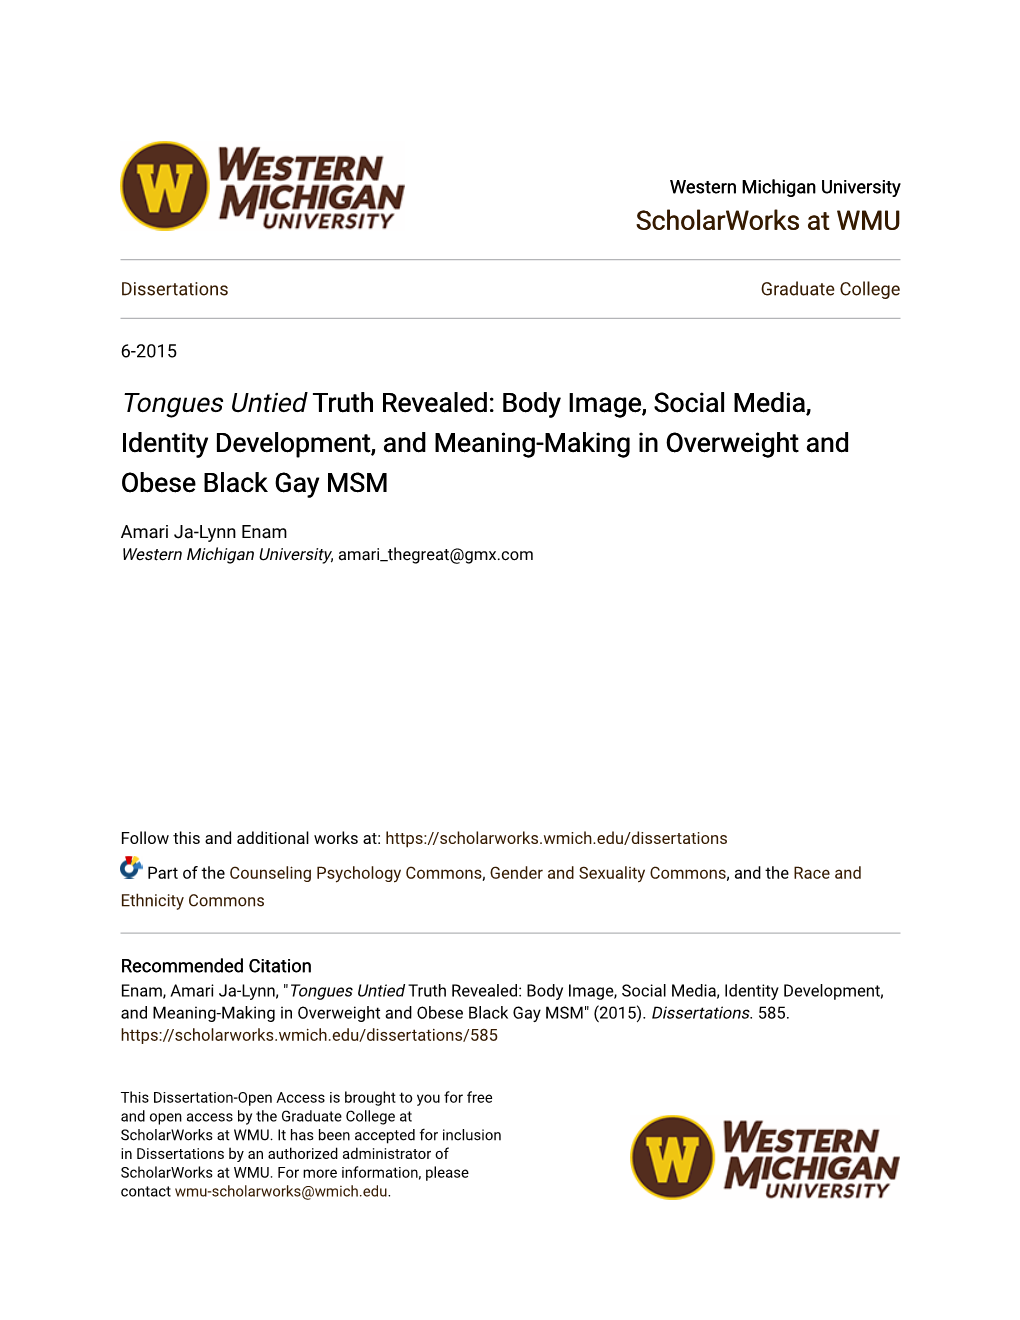 Tongues Untied Truth Revealed: Body Image, Social Media, Identity Development, and Meaning-Making in Overweight and Obese Black Gay MSM